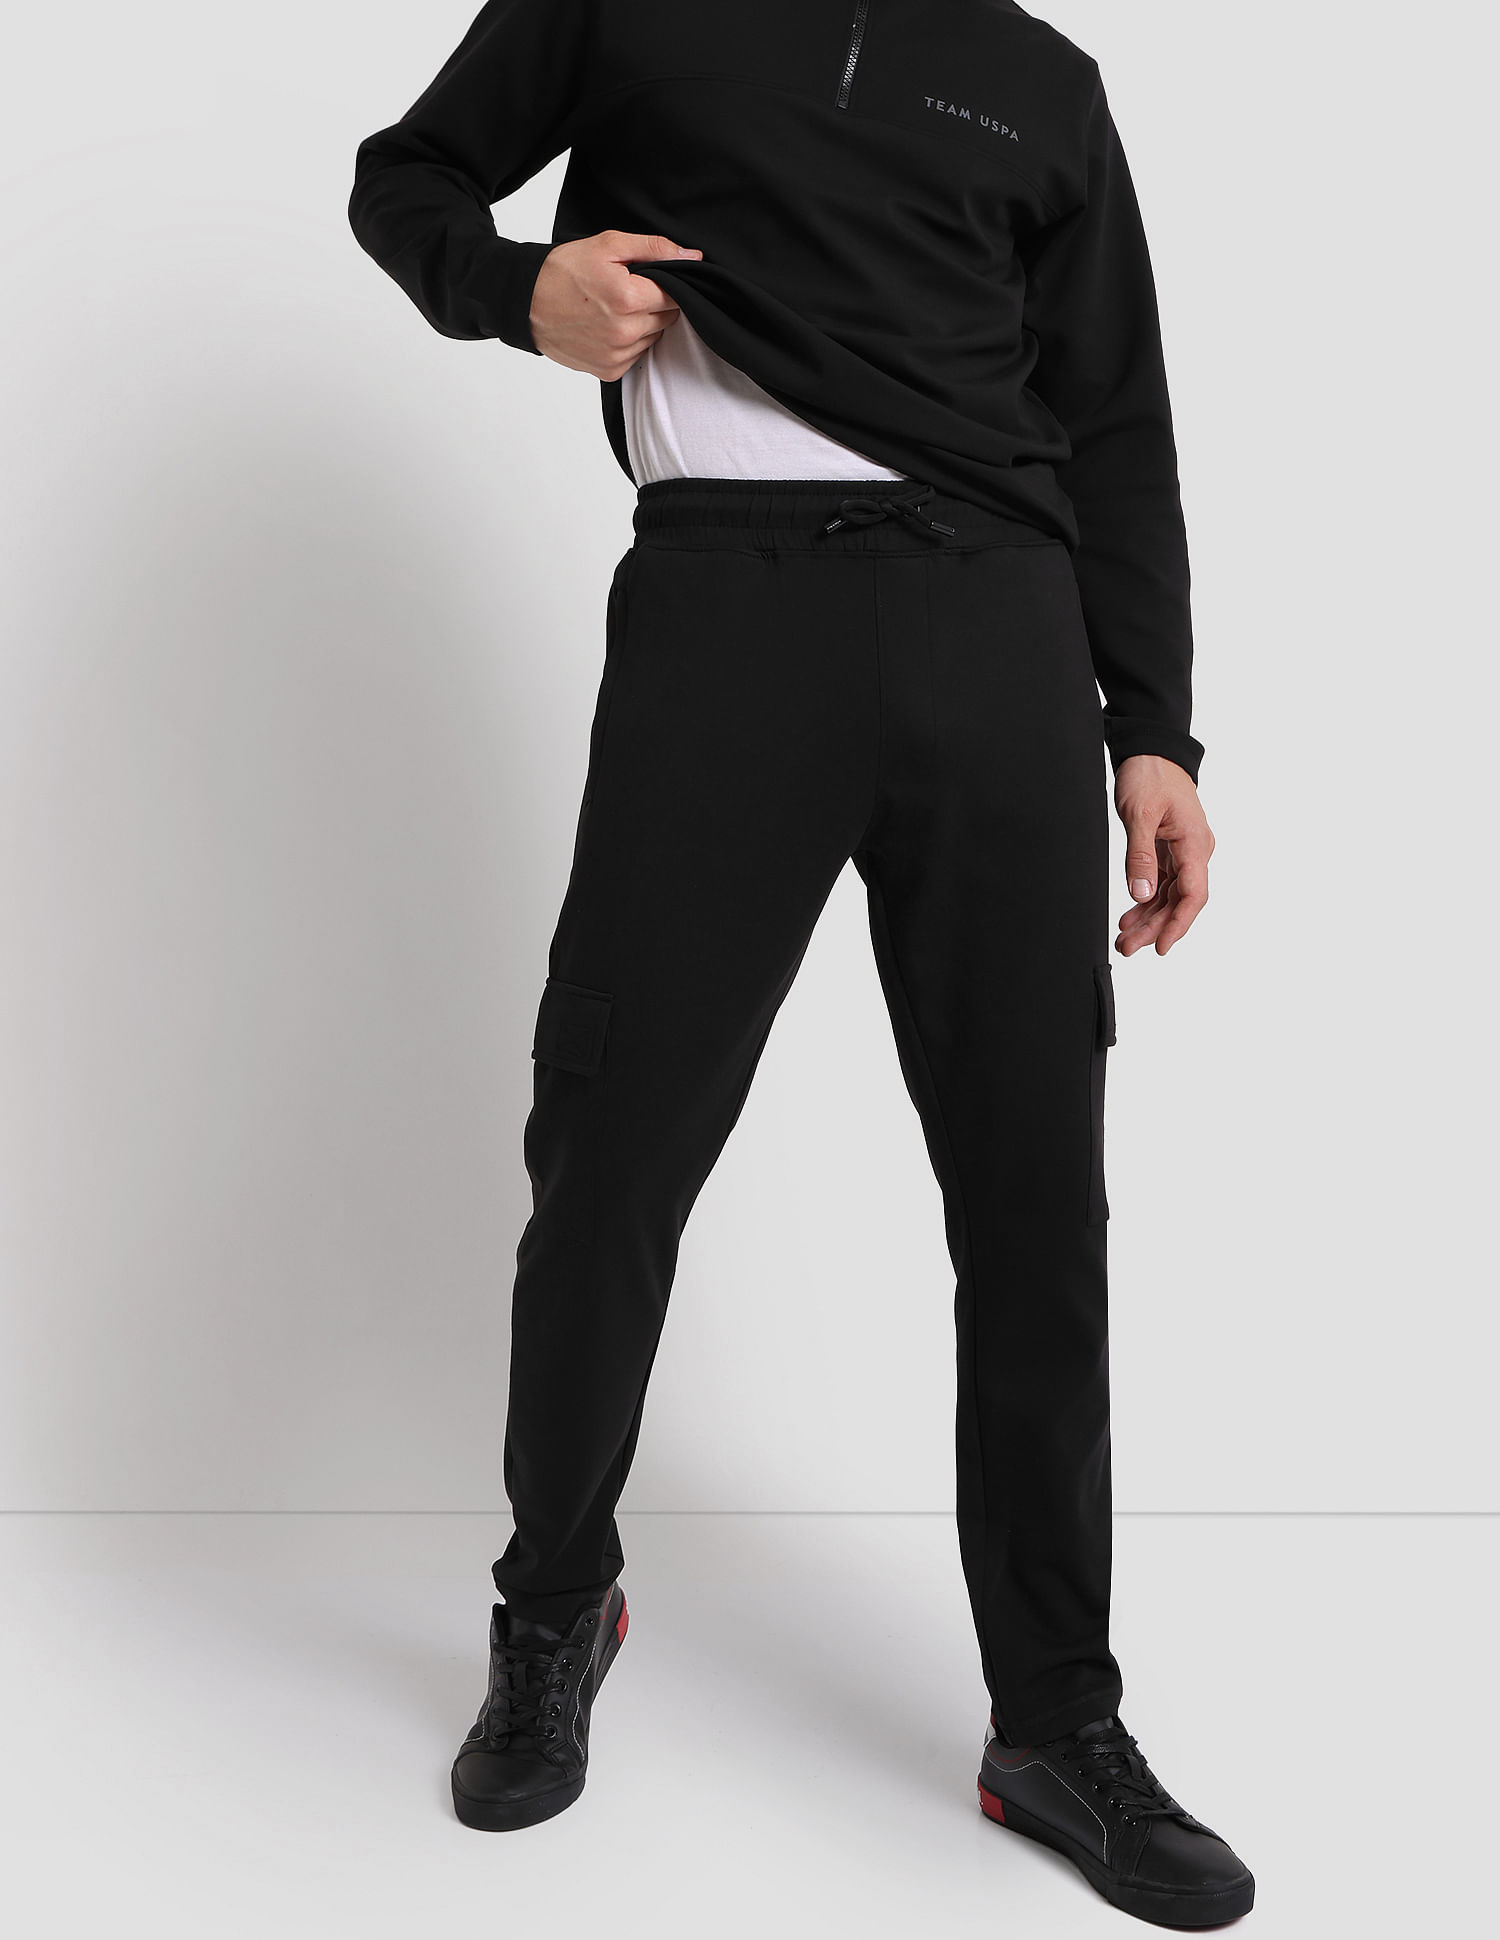 Russell Athletic cargo pants in black  ASOS